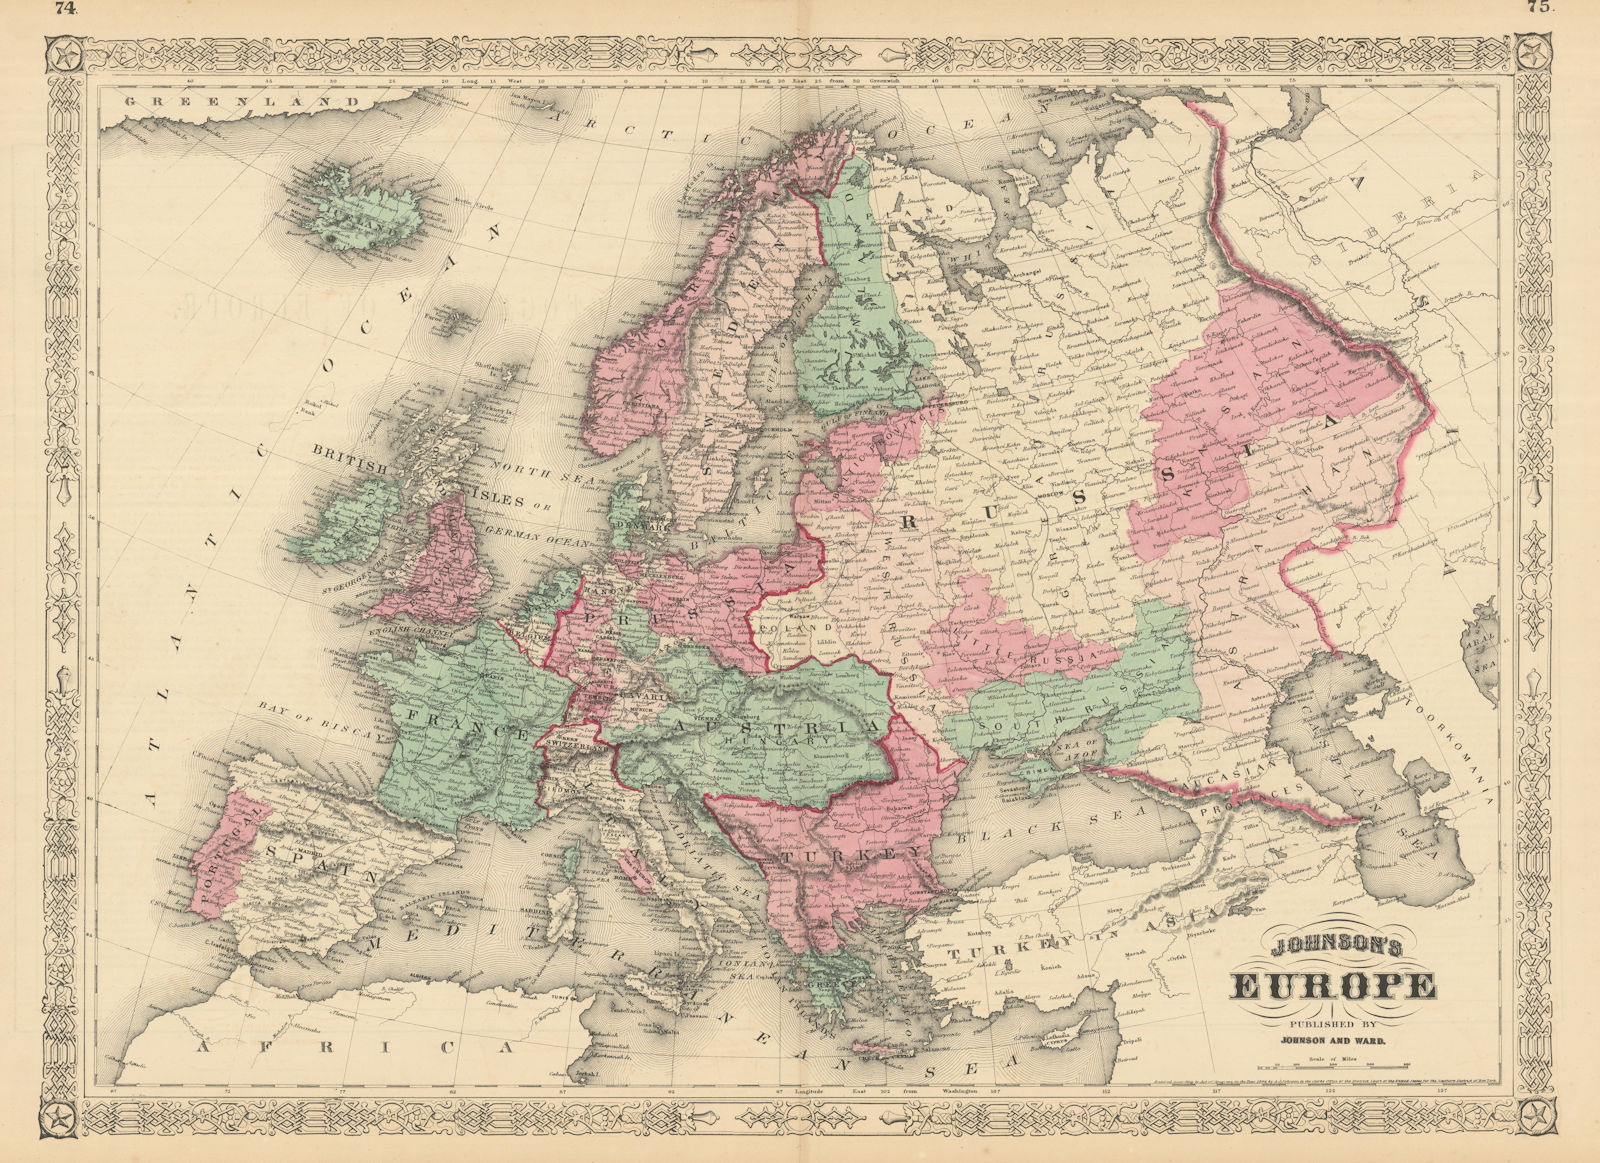 Associate Product Johnson's Europe. Austria Hungary Prussia Turkey Papal States 1866 old map